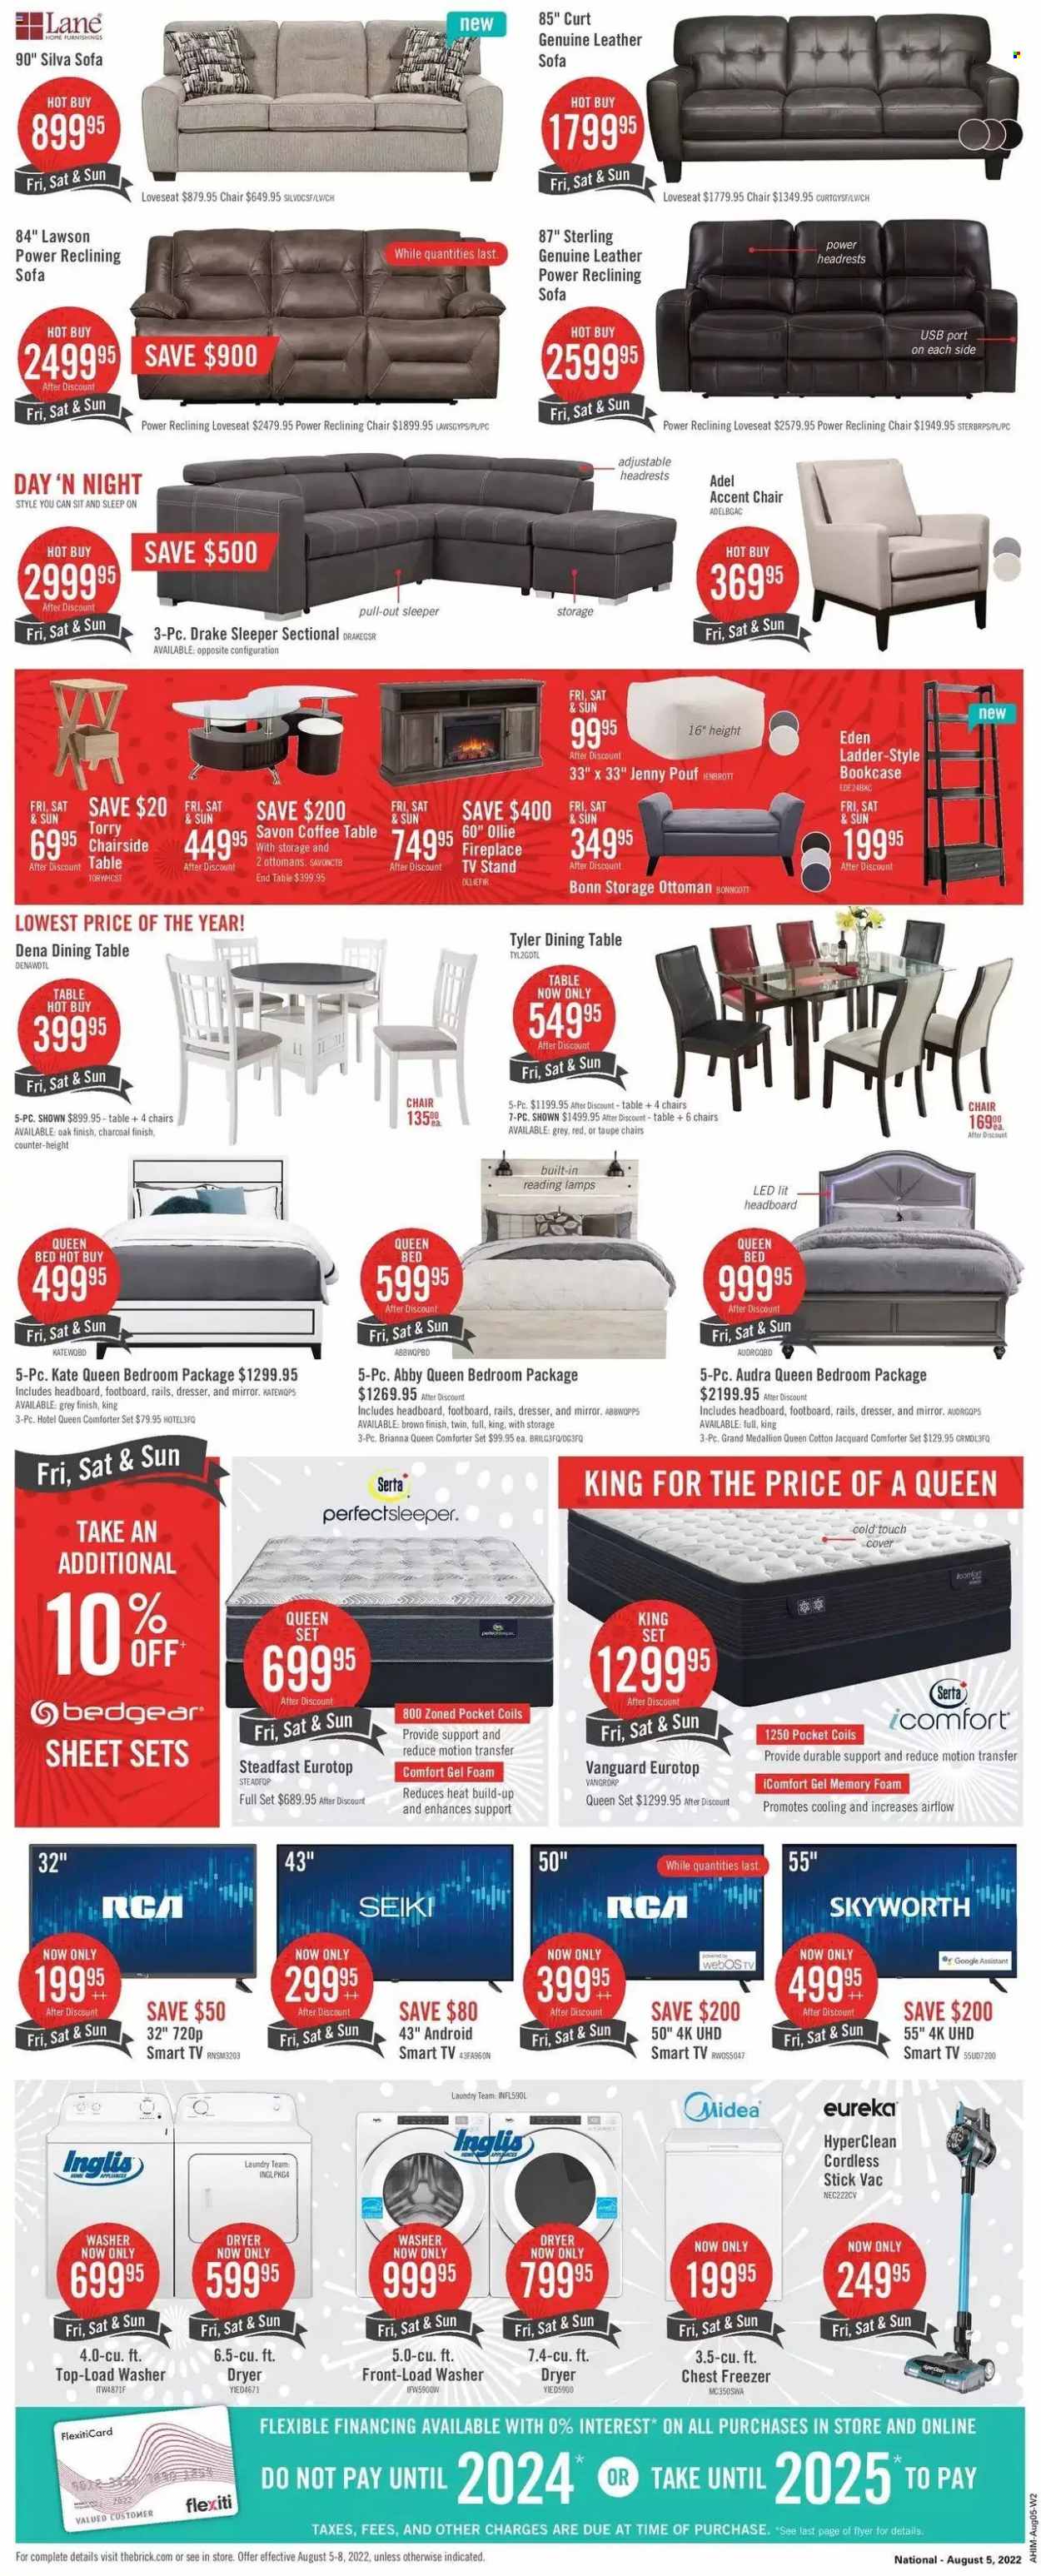 thumbnail - The Brick Flyer - August 05, 2022 - August 08, 2022 - Sales products - comforter, UHD TV, Skyworth, freezer, chest freezer, washing machine, dining table, chair, accent chair, leather sofa, loveseat, sofa, coffee table, end table, TV stand, bookcase, ottoman, bed, queen bed, headboard, dresser, mirror, ladder, smart tv. Page 2.